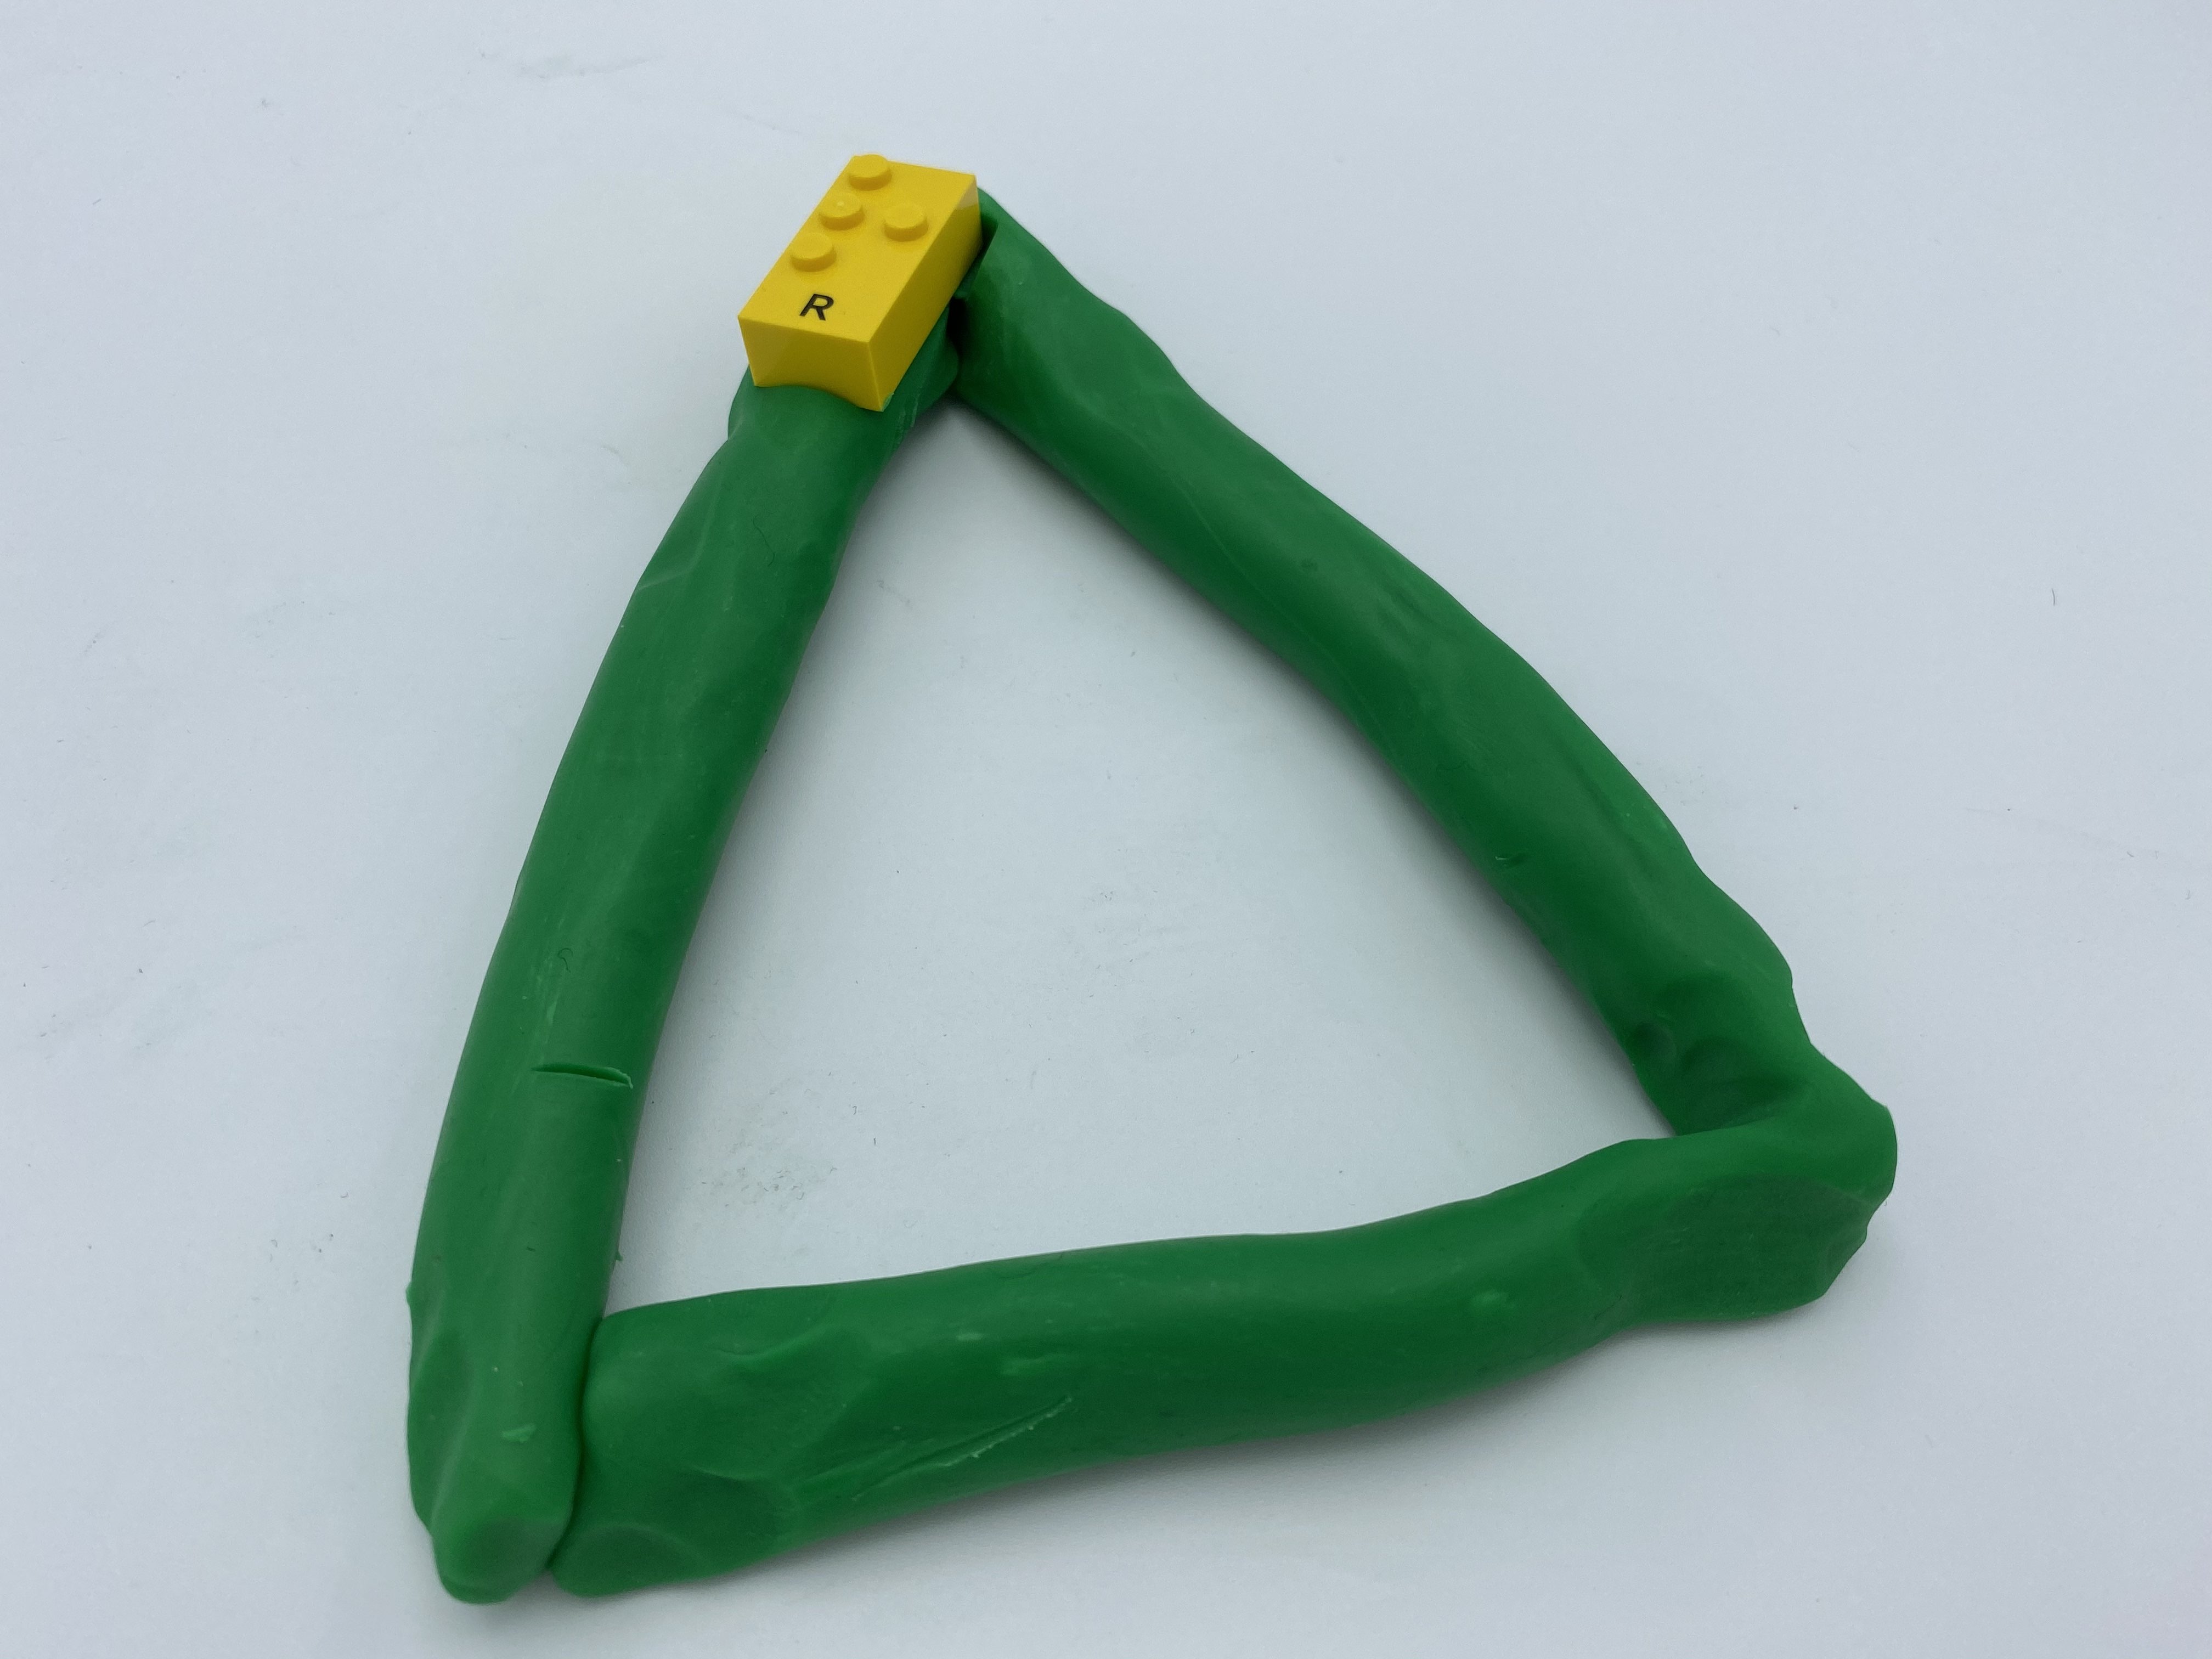 A triangle shape of Playdough with a LBB on it.